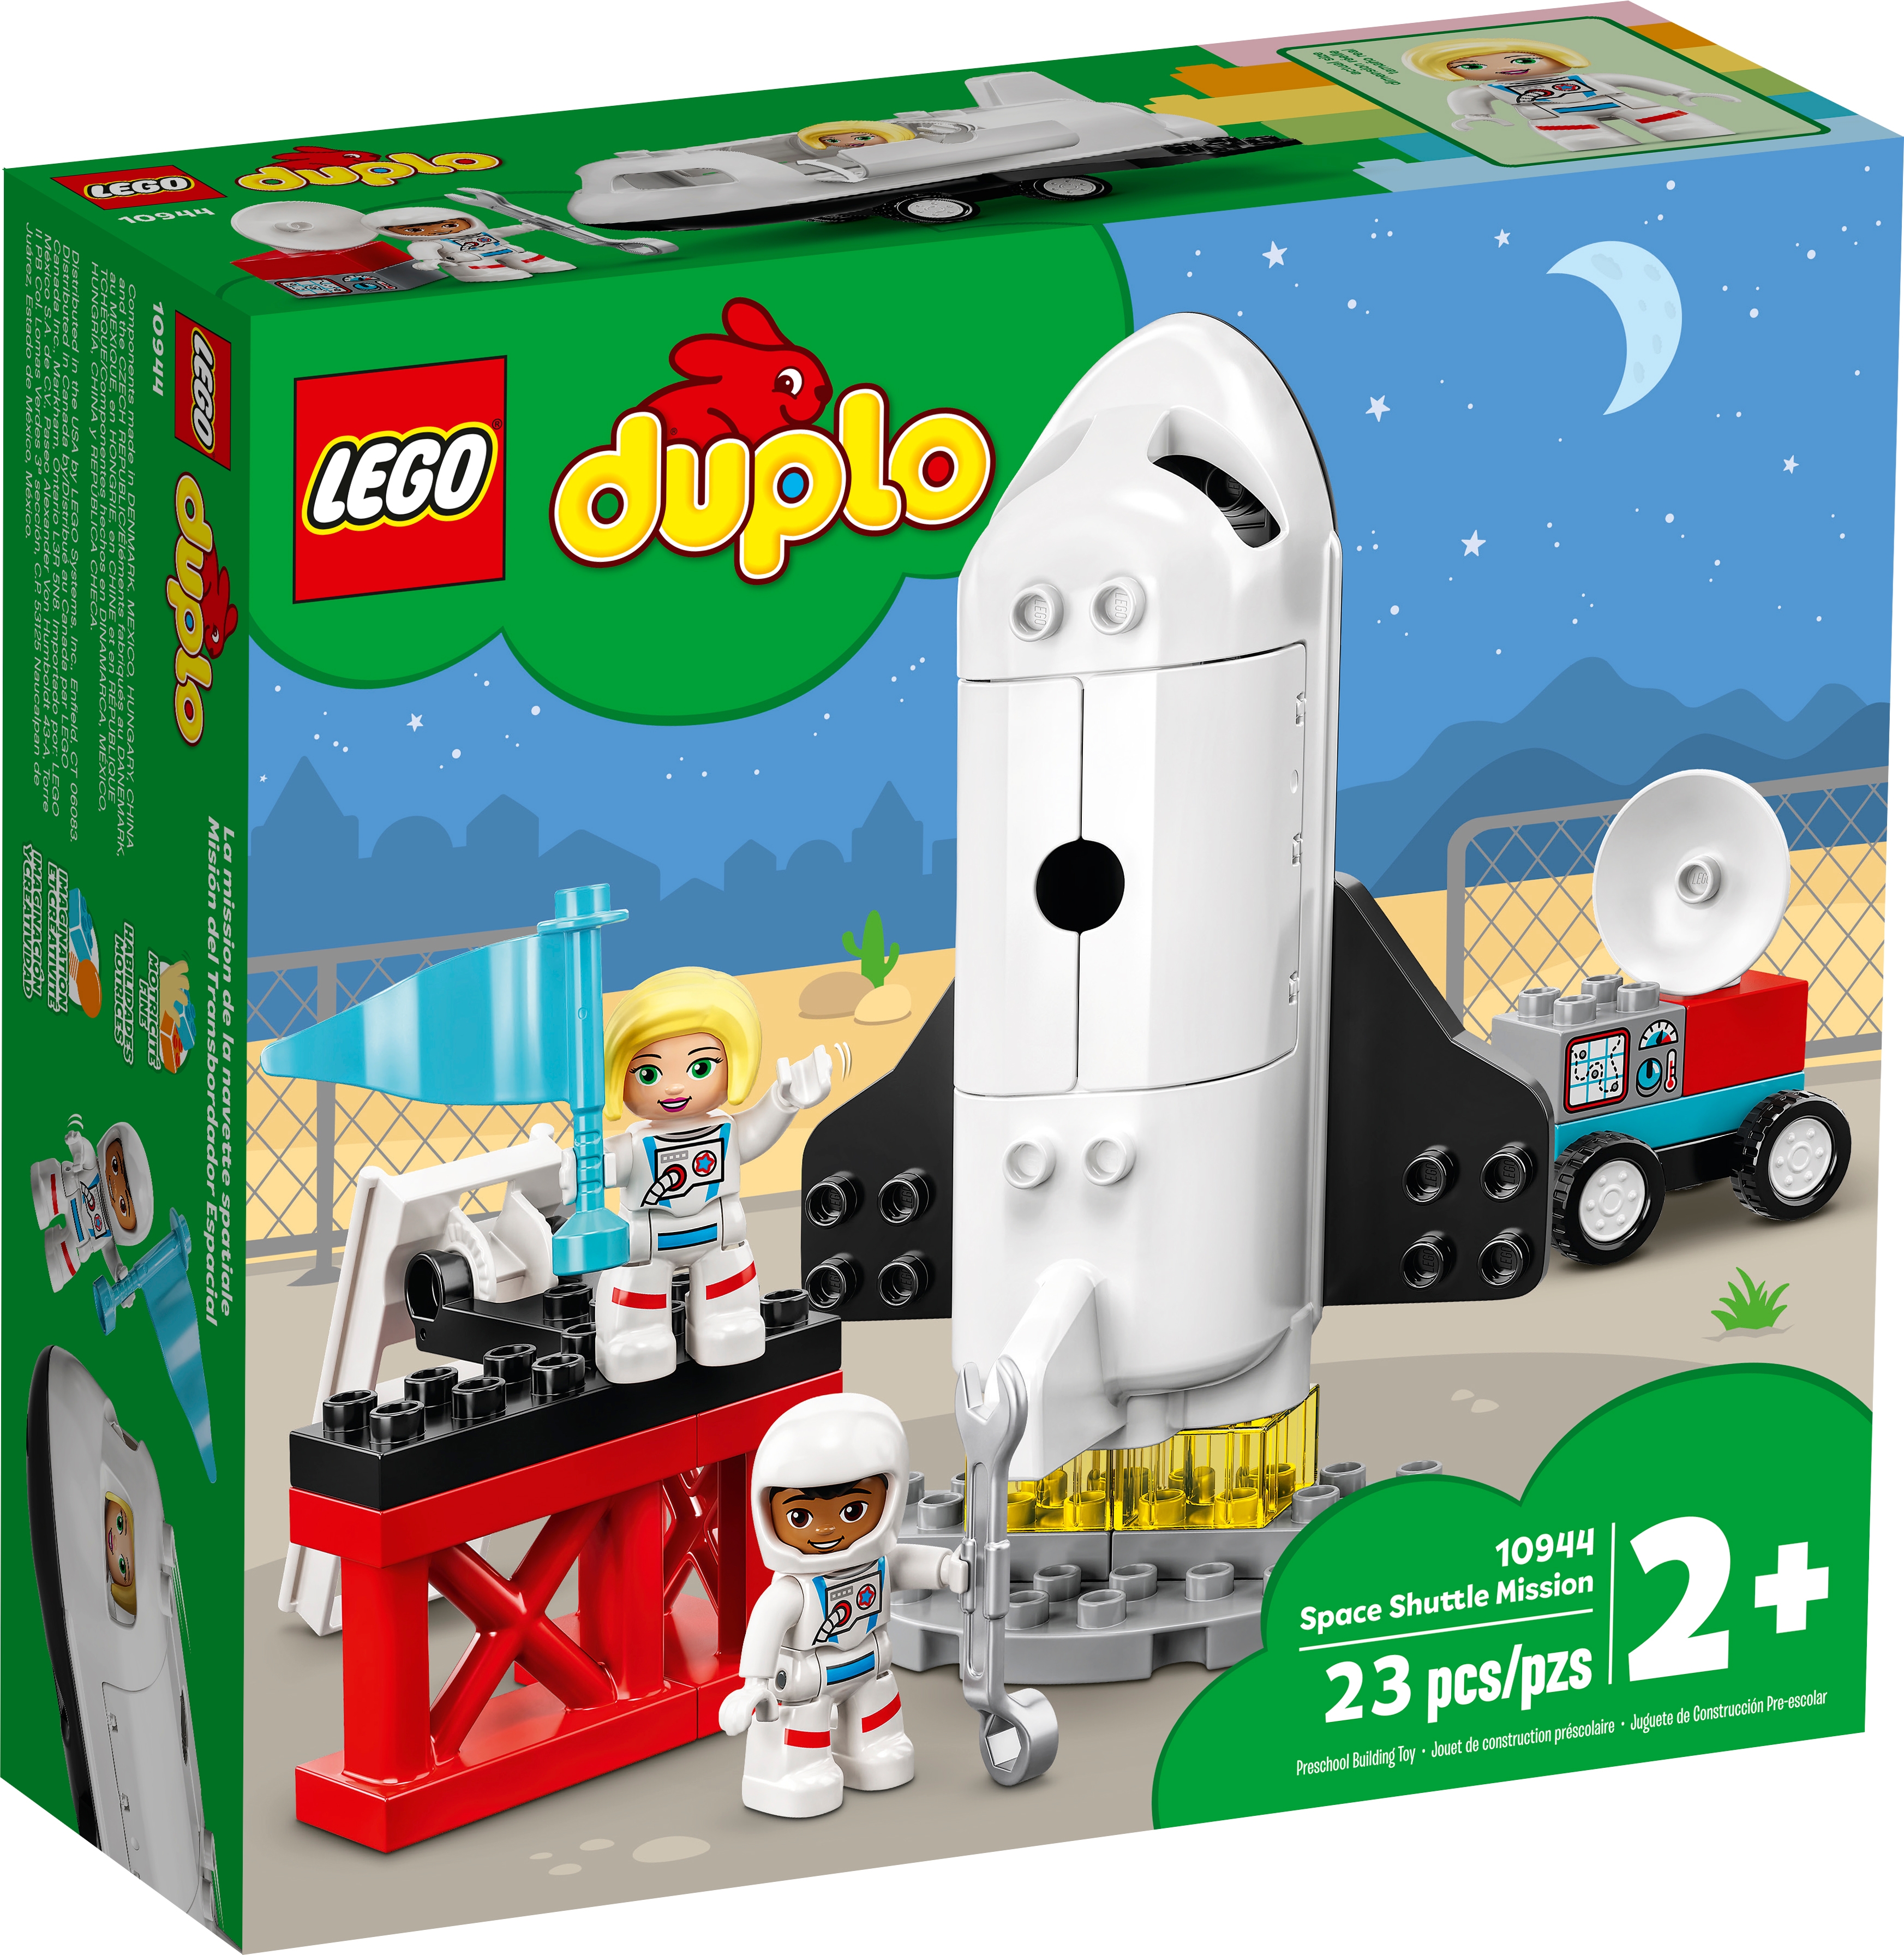 Lego 10927 DUPLO Town Pizza Stand Playset with Pizza and Dog Figure, Large Bricks Toy for Toddlers 2+ Year Old 